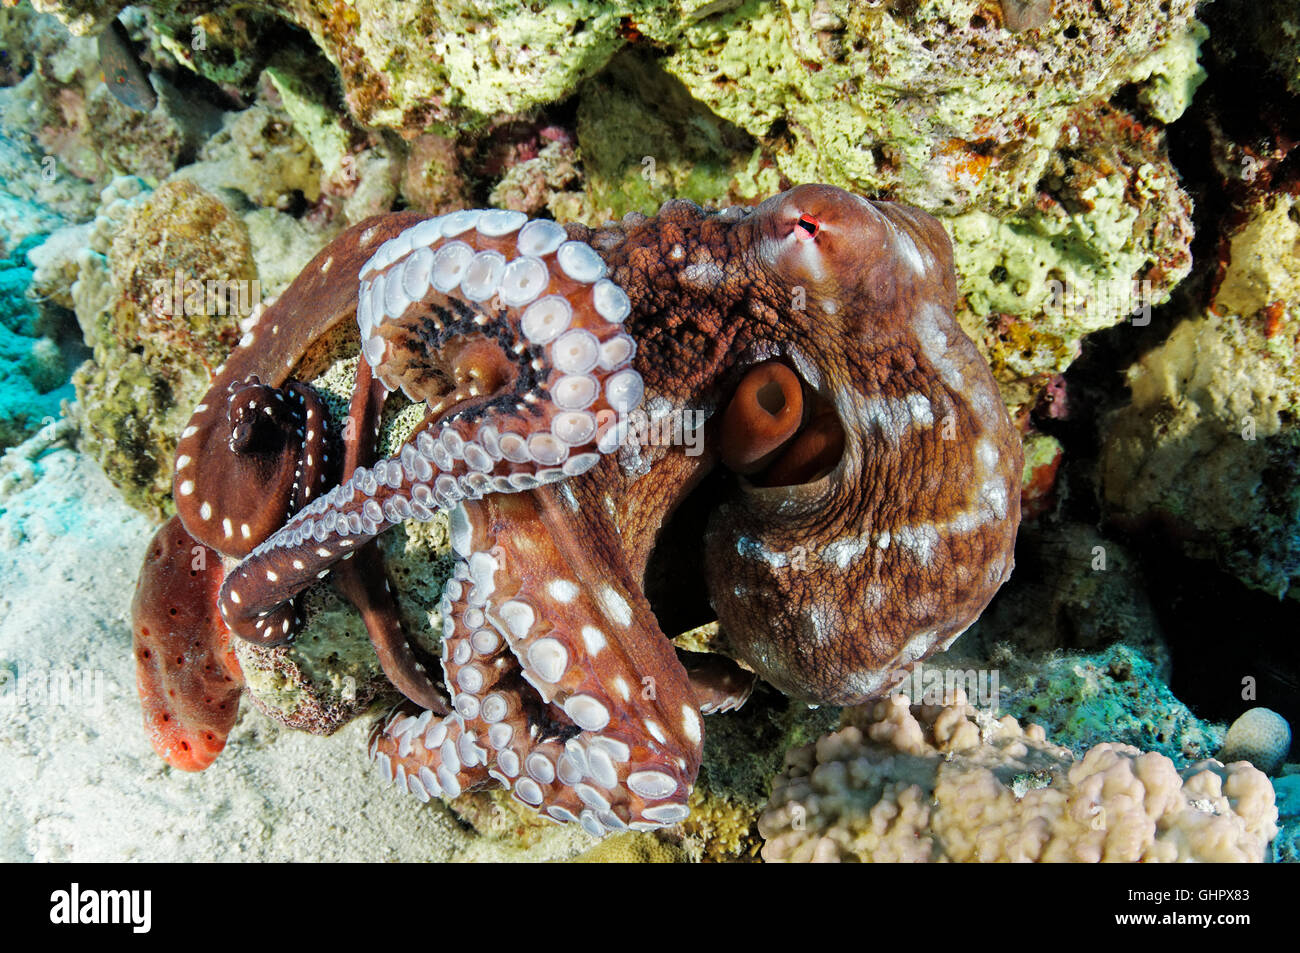 Callistoctopus macropus, White spotted octopus, Hurghada, l'île de Giftun Reef, Red Sea, Egypt, Africa Banque D'Images